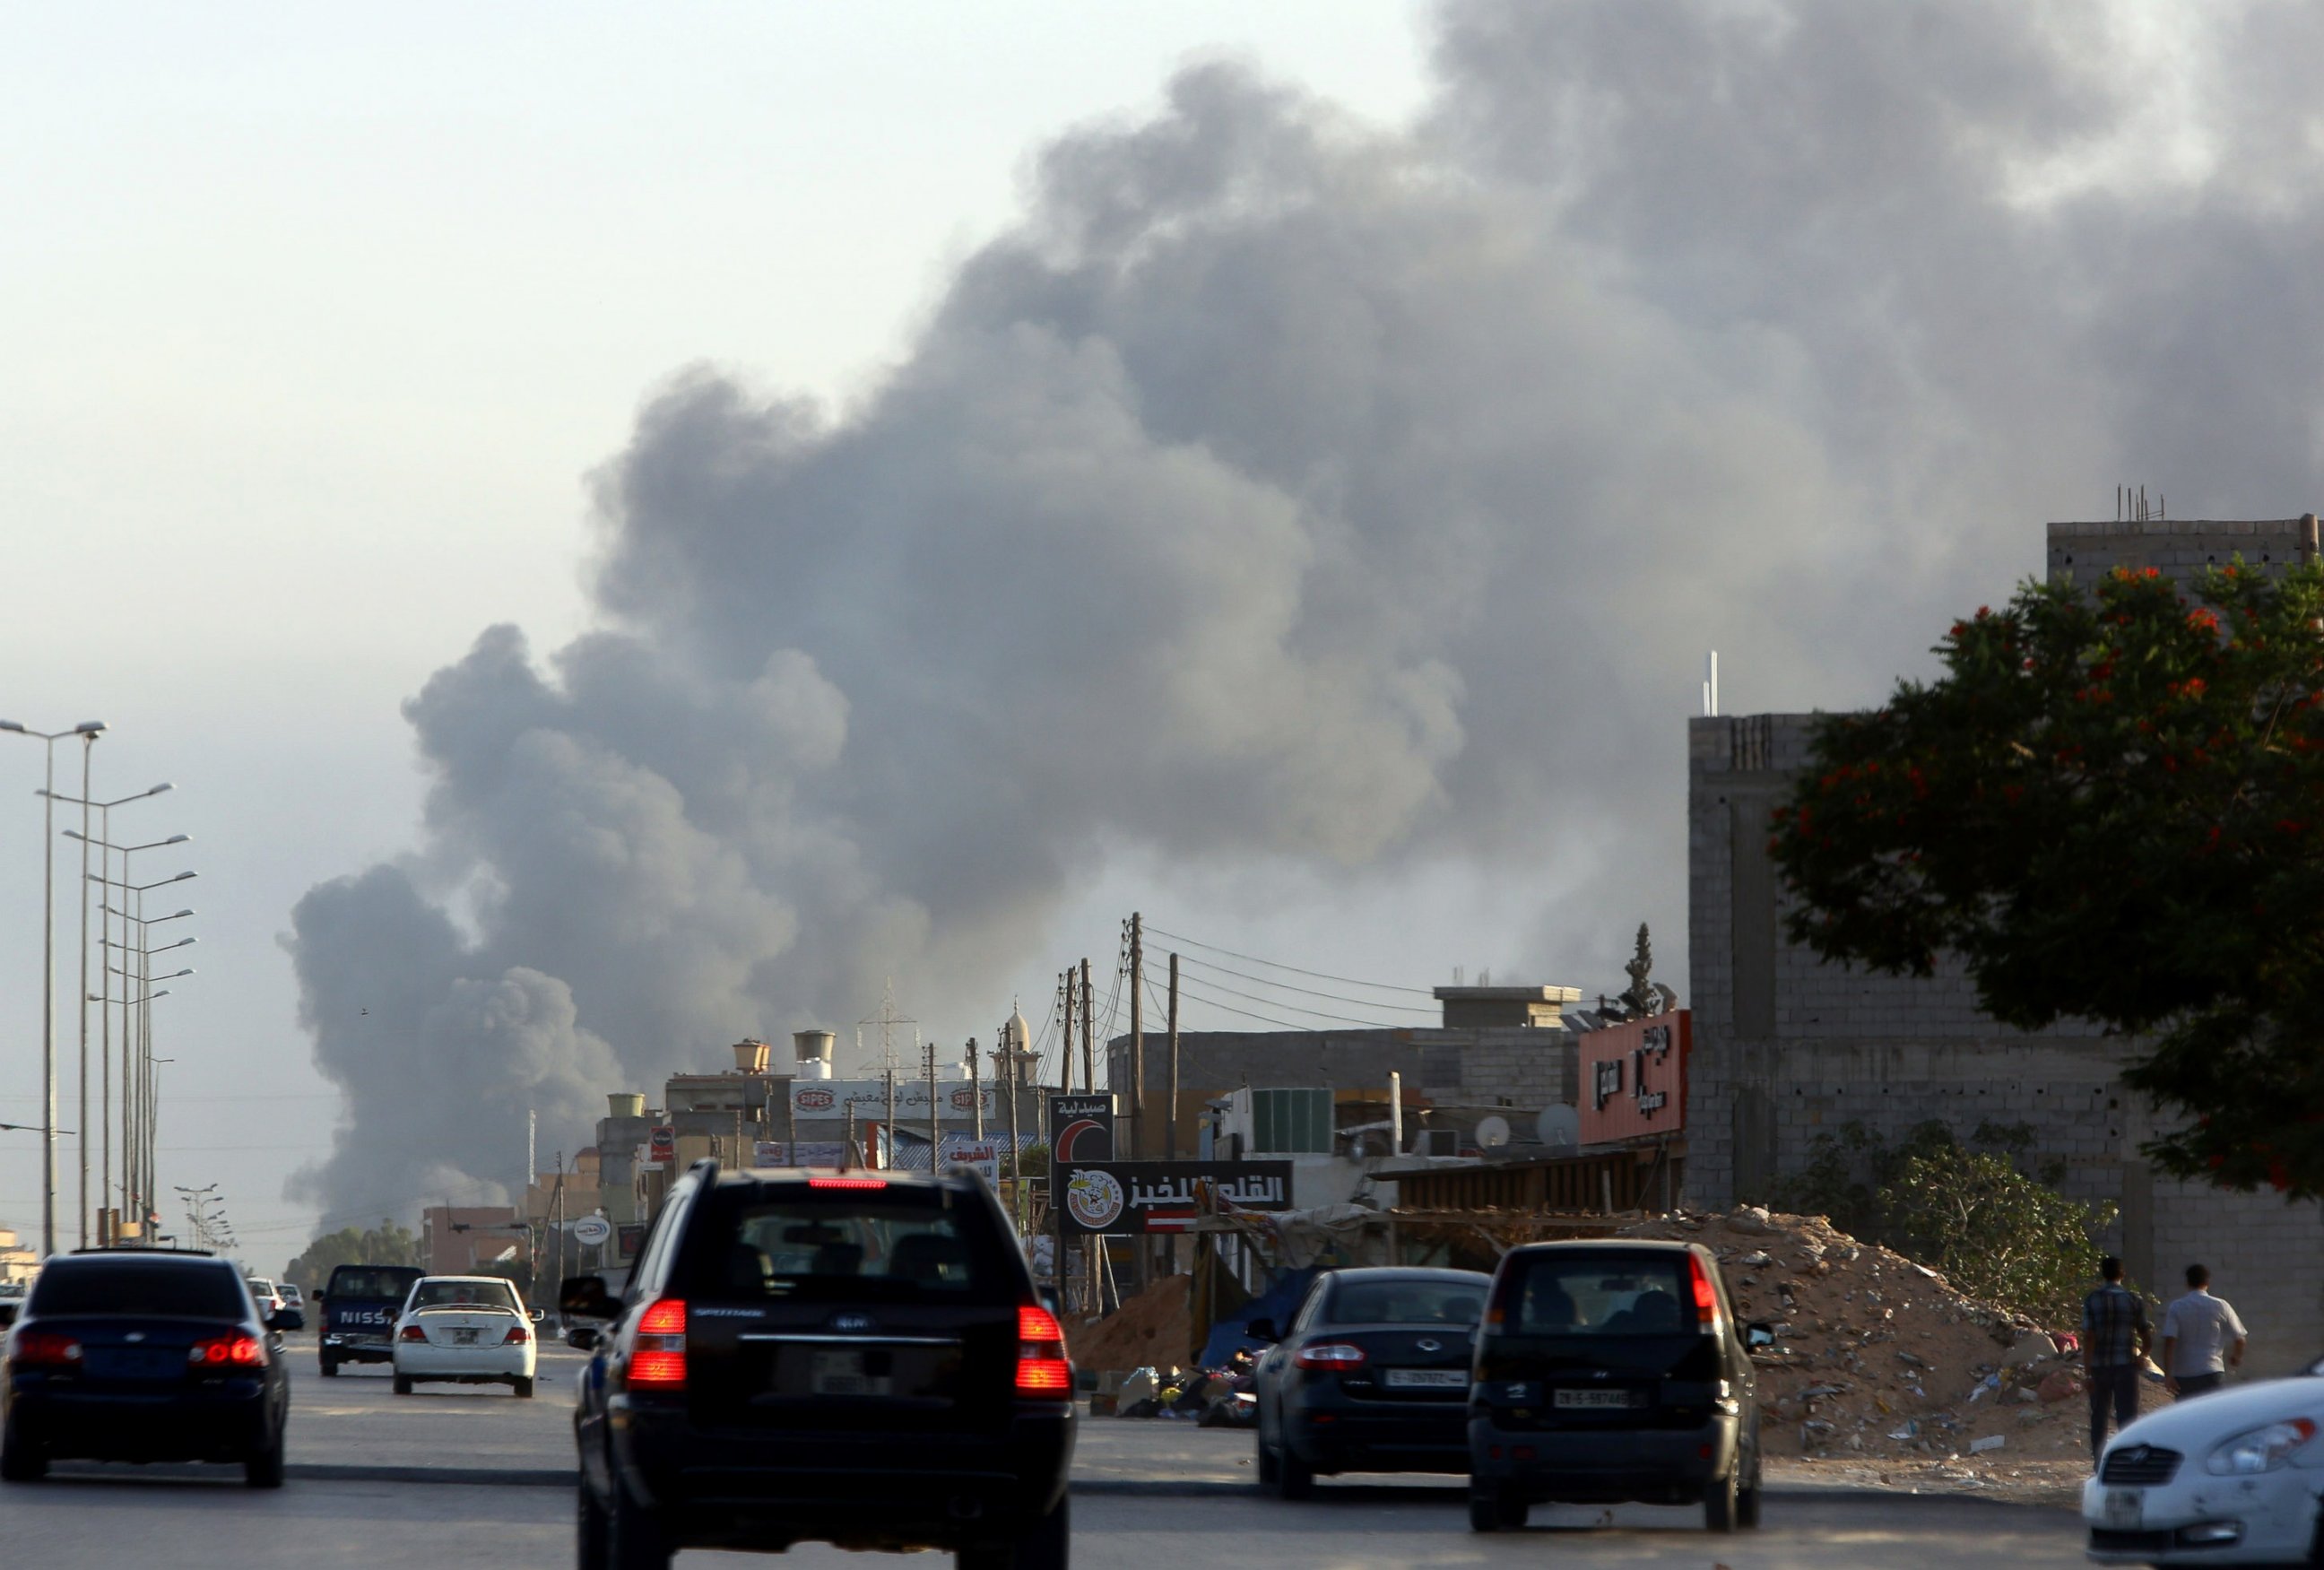 PHOTO: Smoke billows from an area near Tripoli's international airport as fighting between rival factions around the capital's airport continues on July 24, 2014.